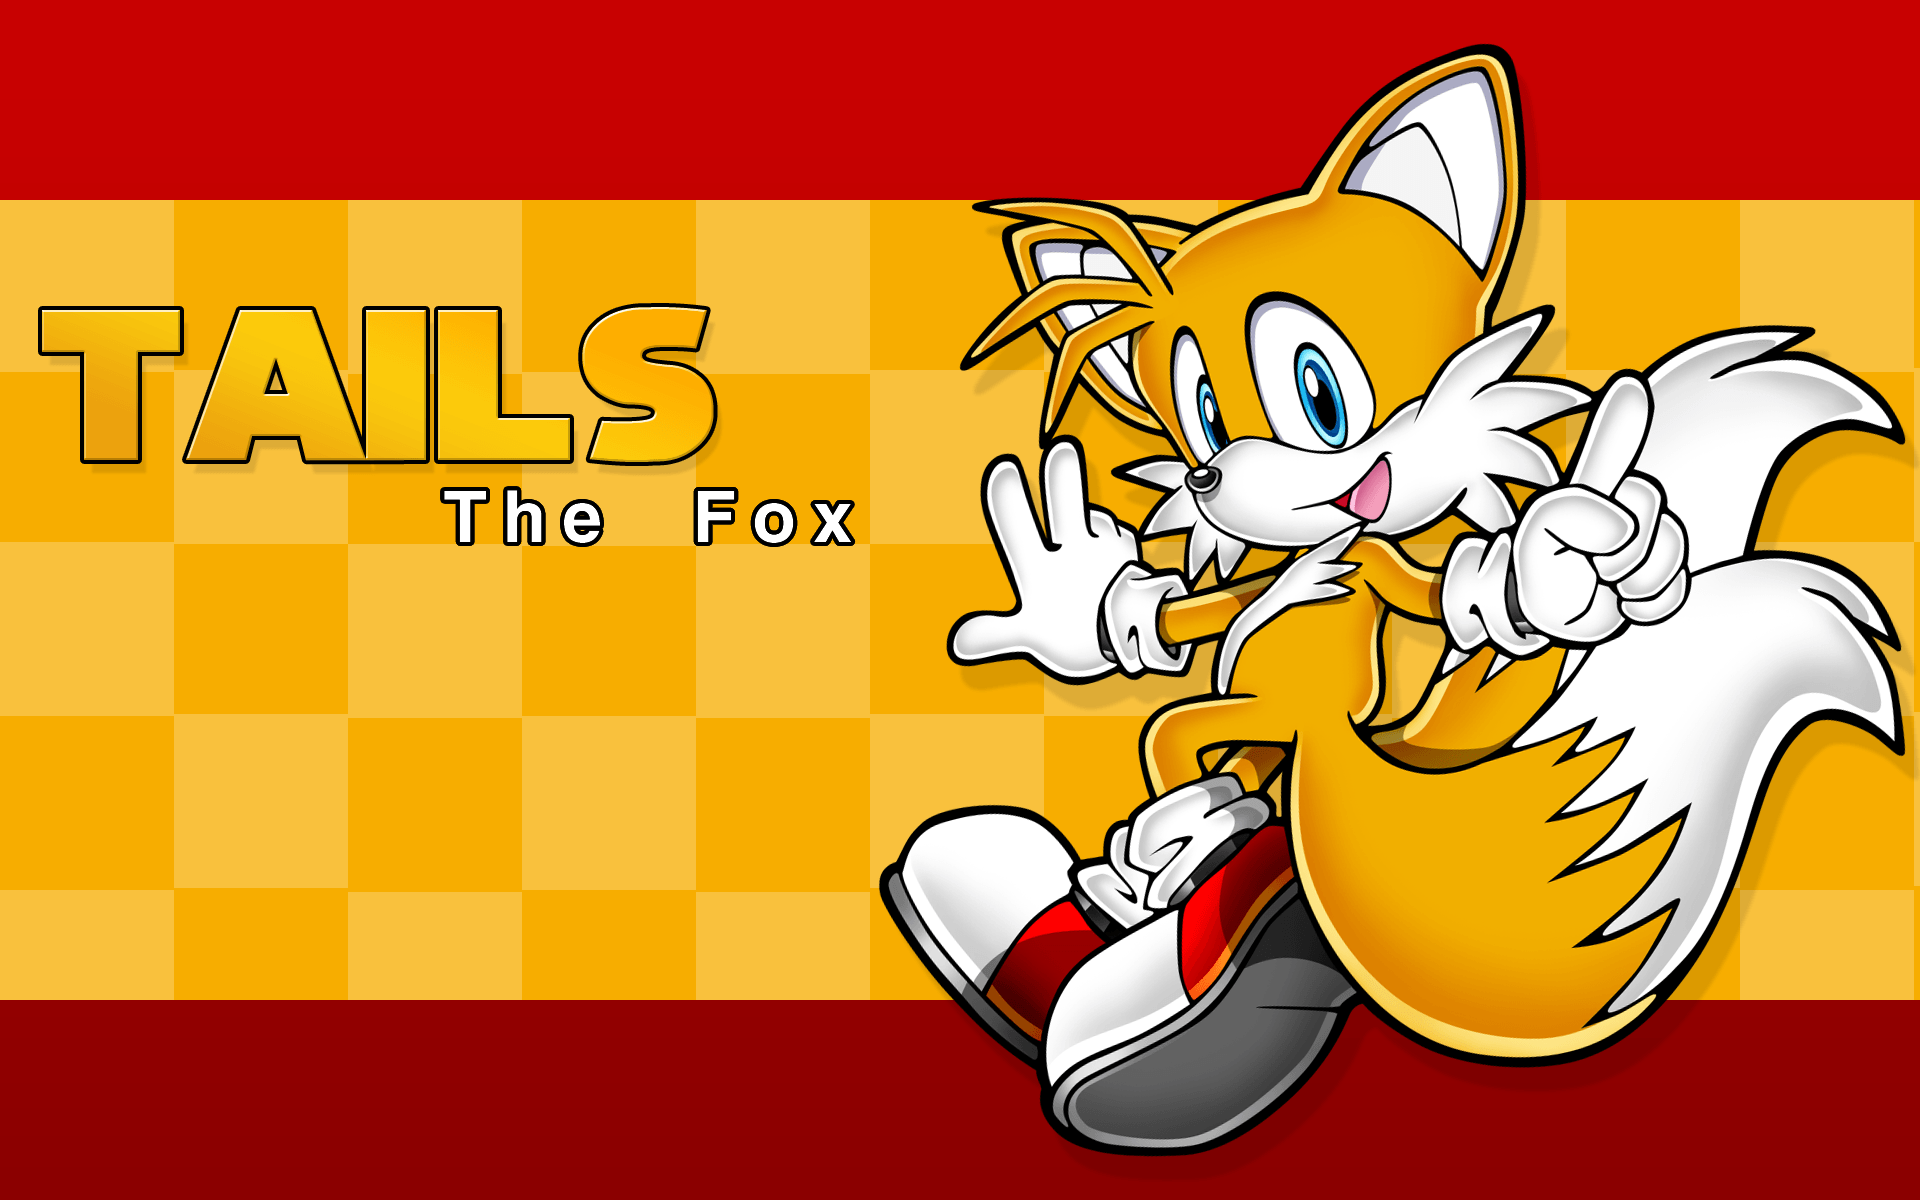 Tails The Fox Wallpapers by darkfailure.